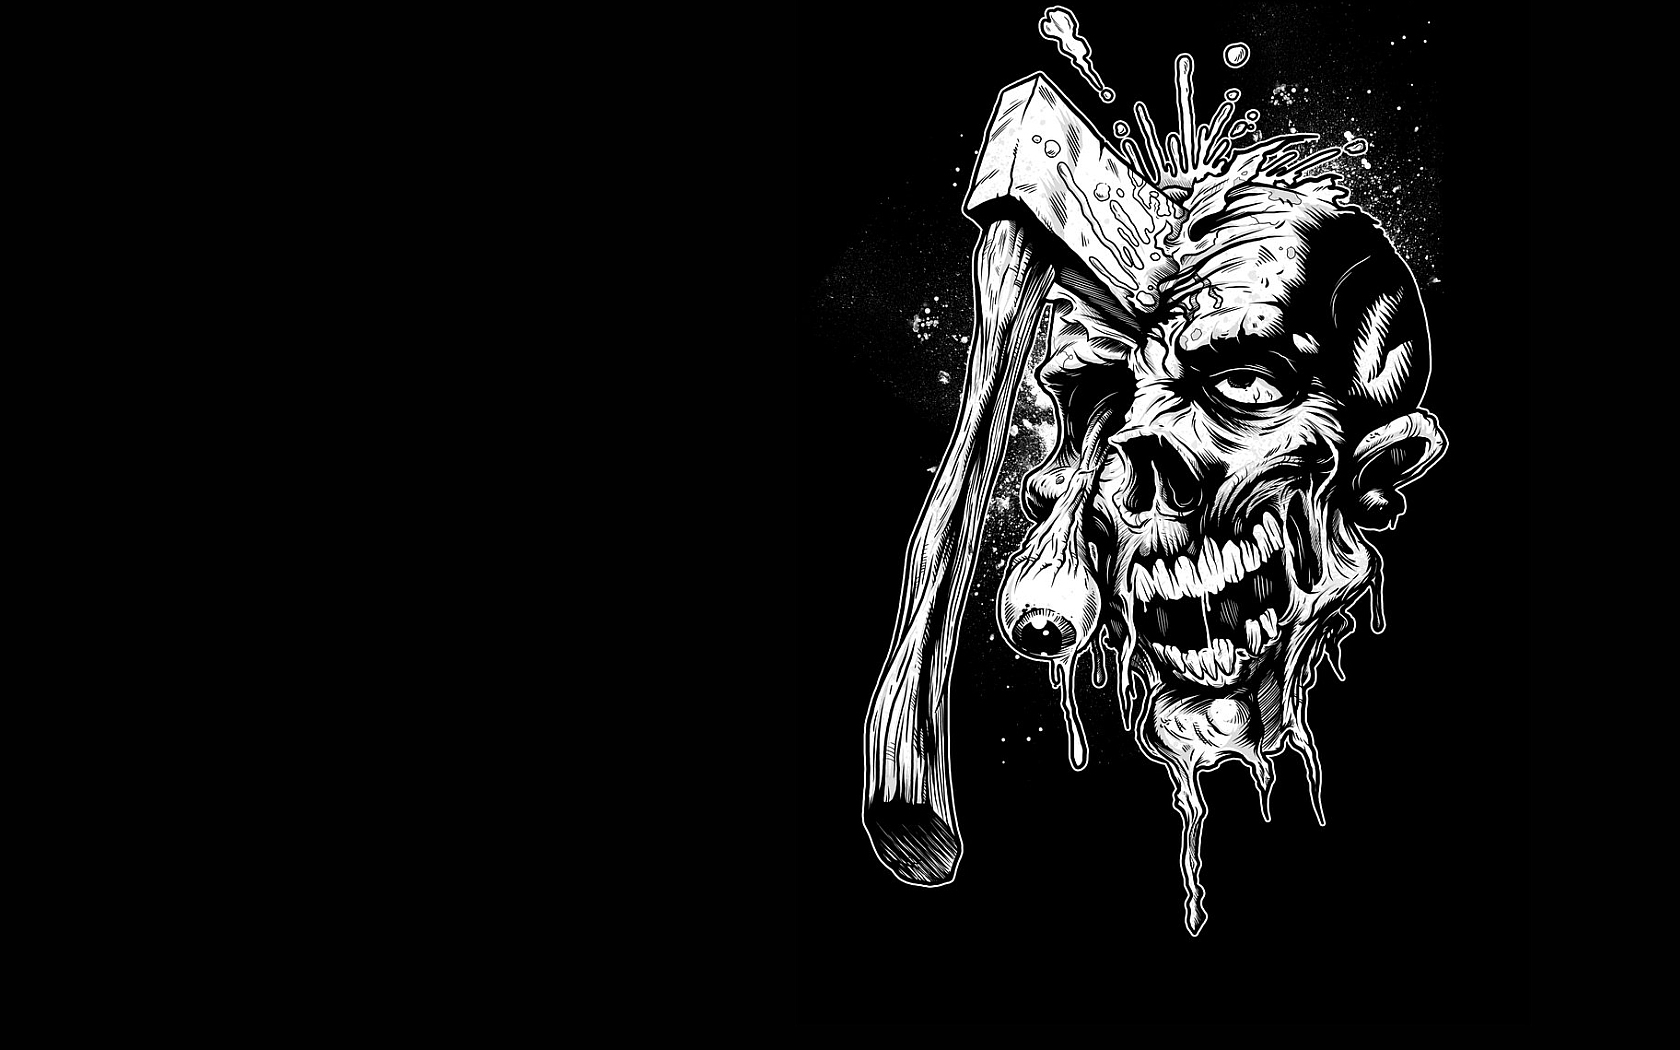 Download the Axed Zombie Wallpaper, Axed Zombie iPhone Wallpaper ...